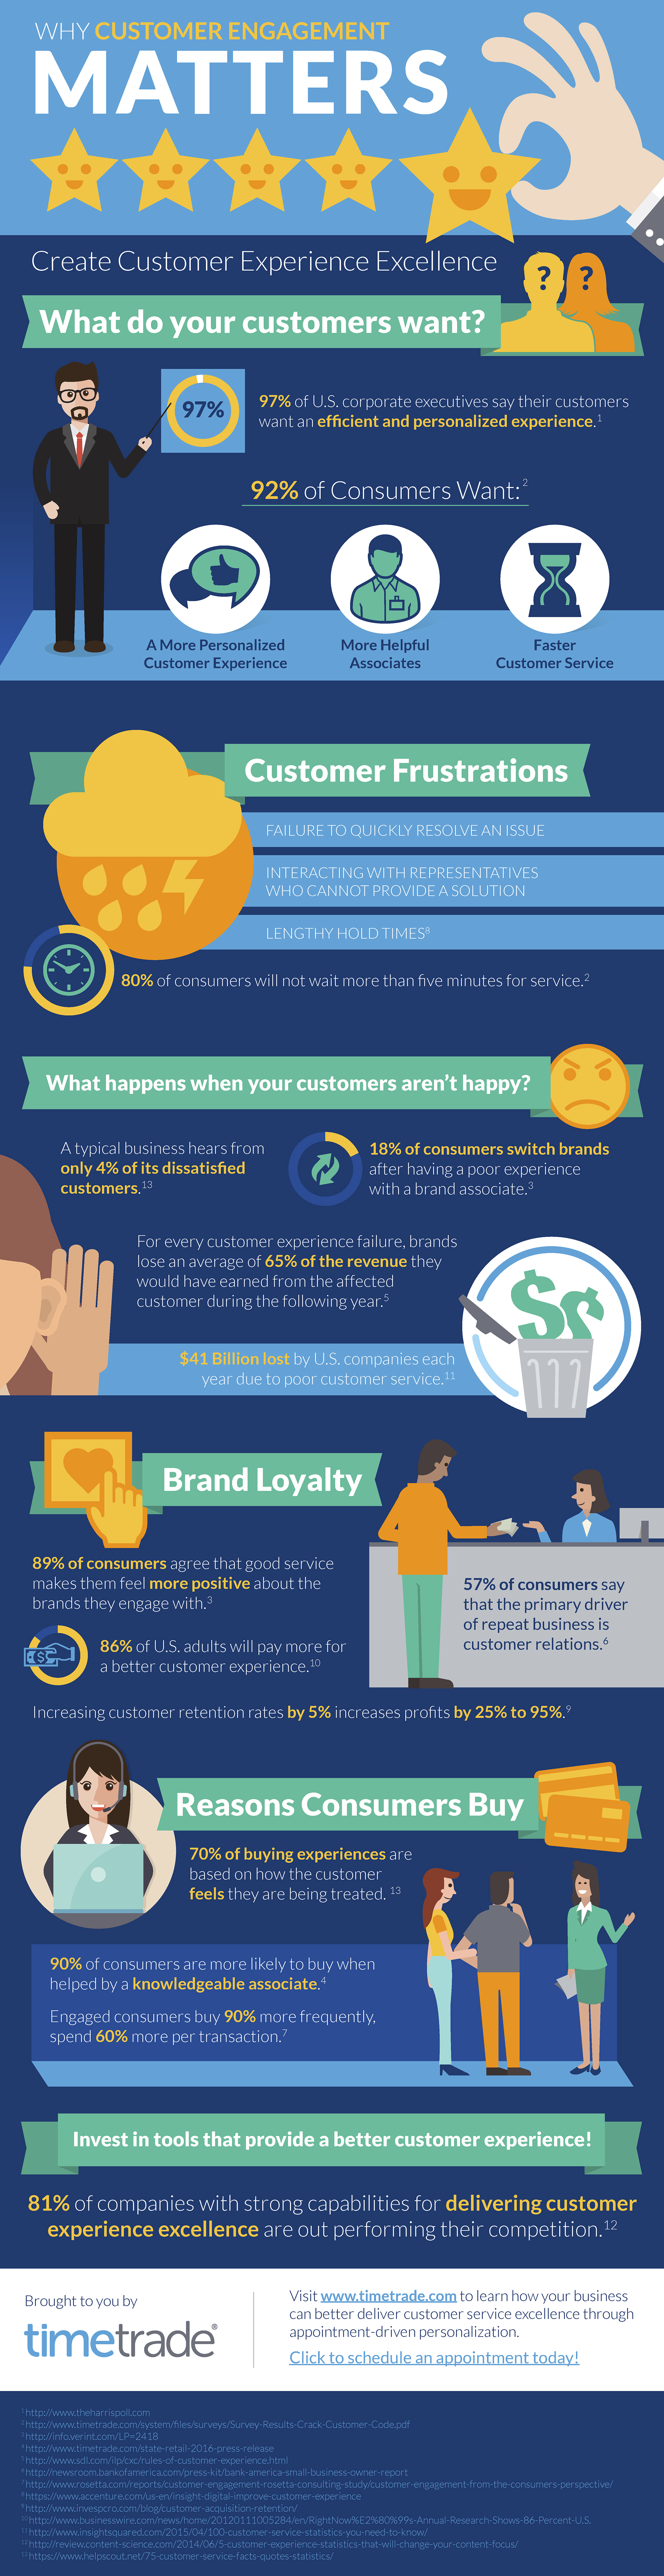 Why Customer Engagement Matters